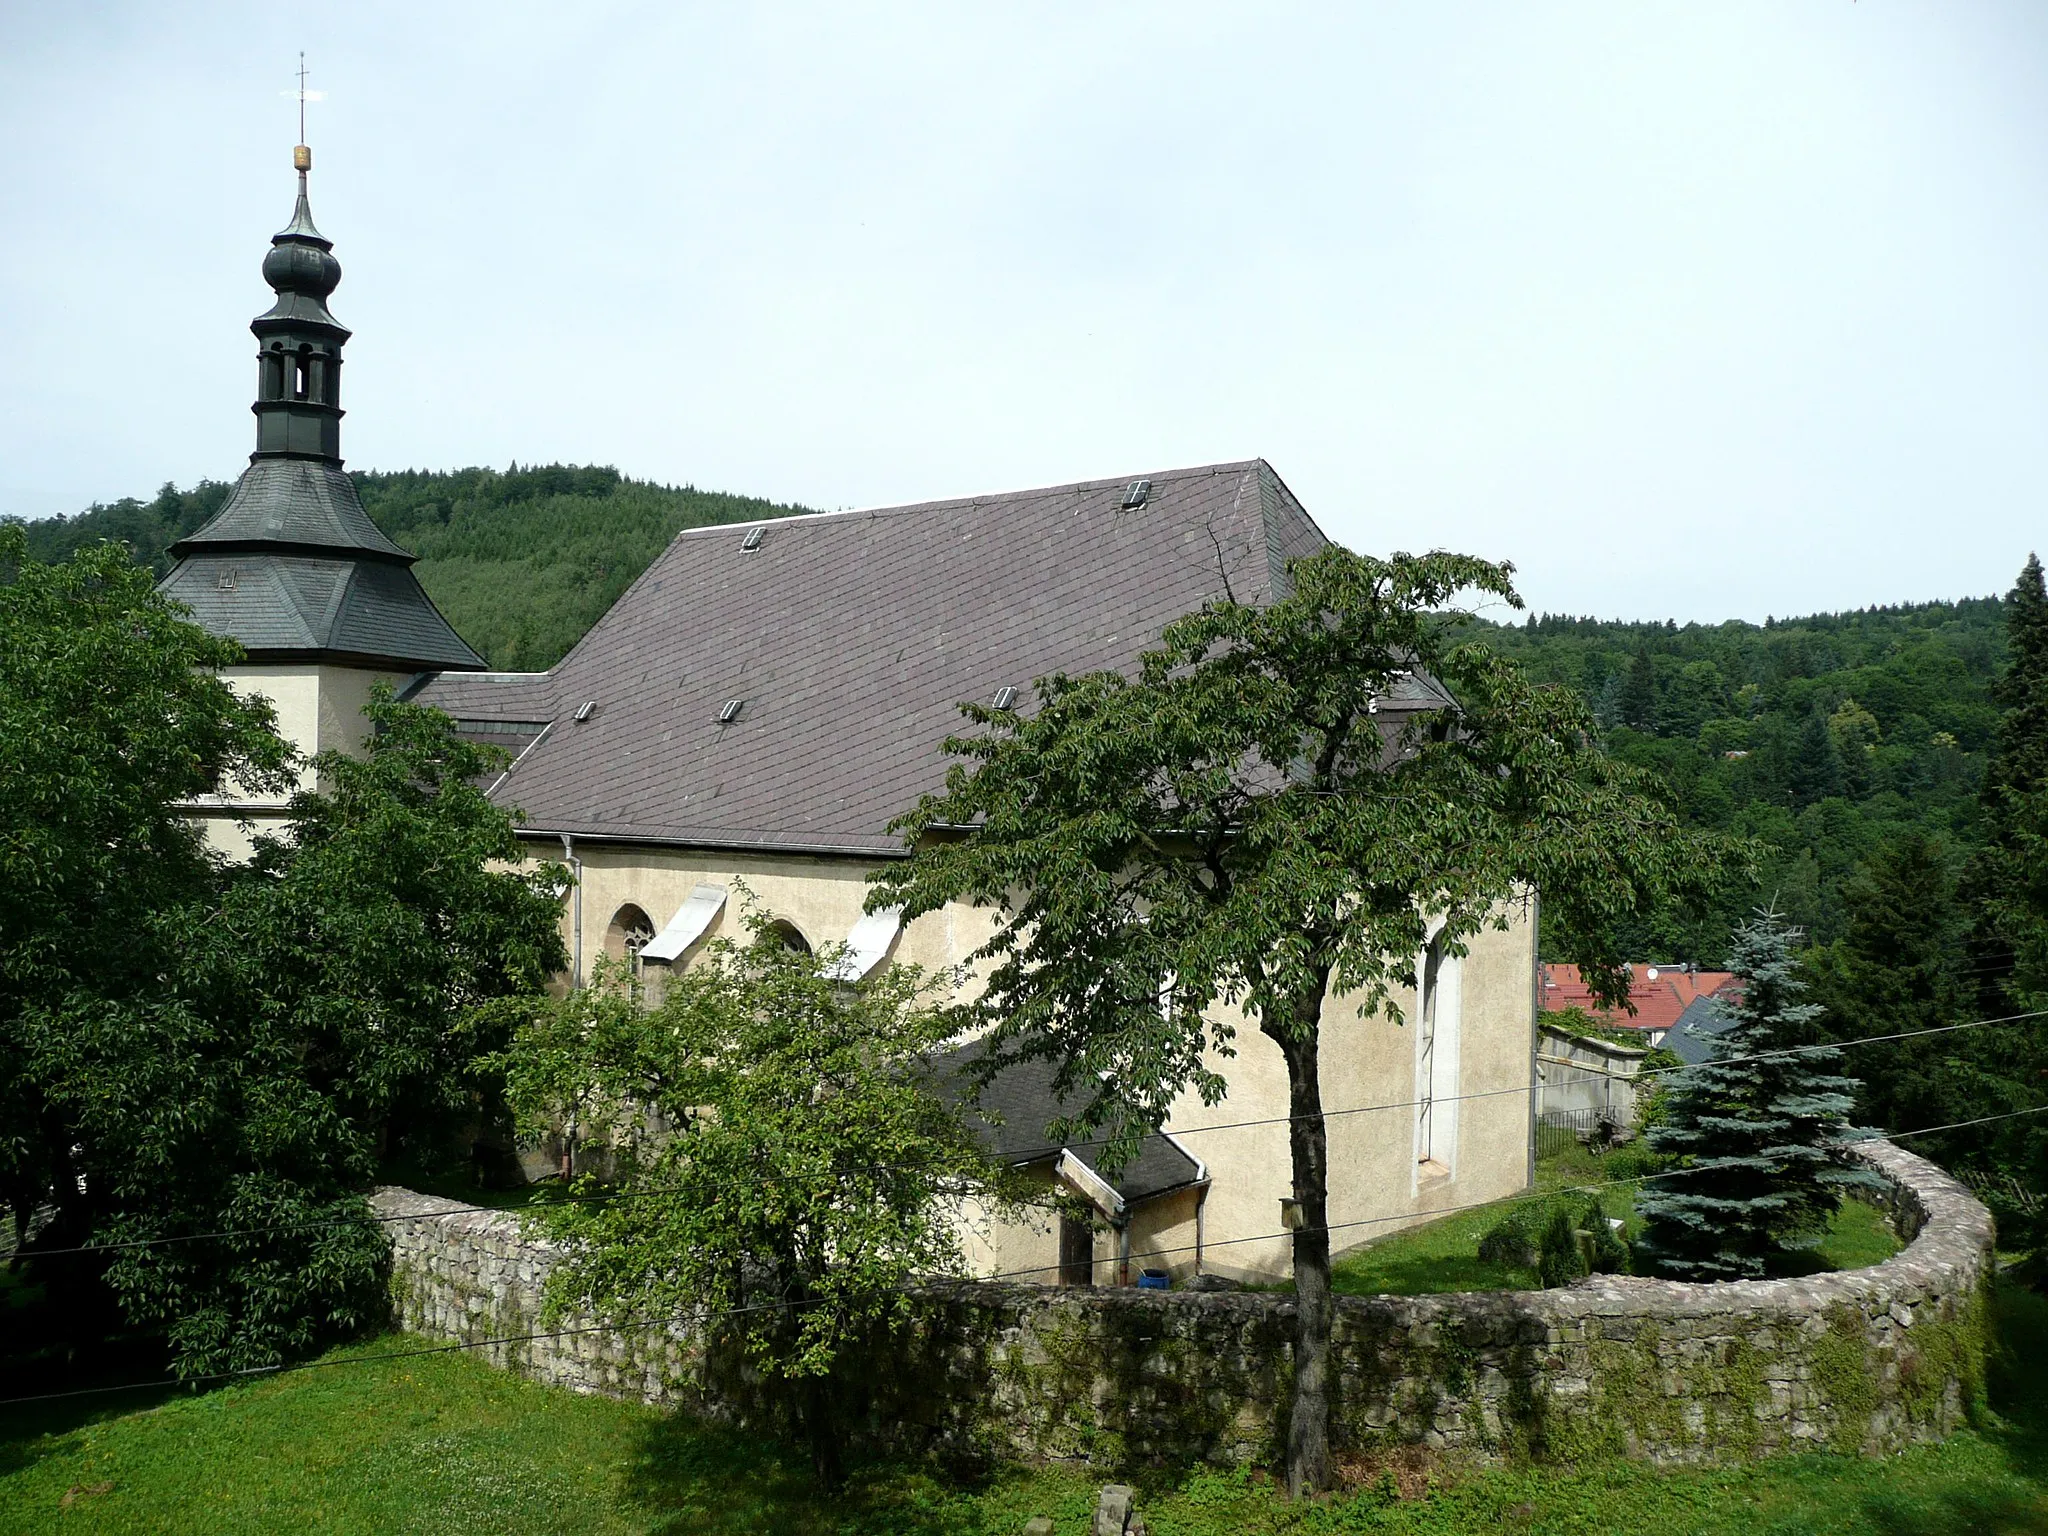 Photo showing: This image shows the evangelic church in Bad Gottleuba in Saxony.